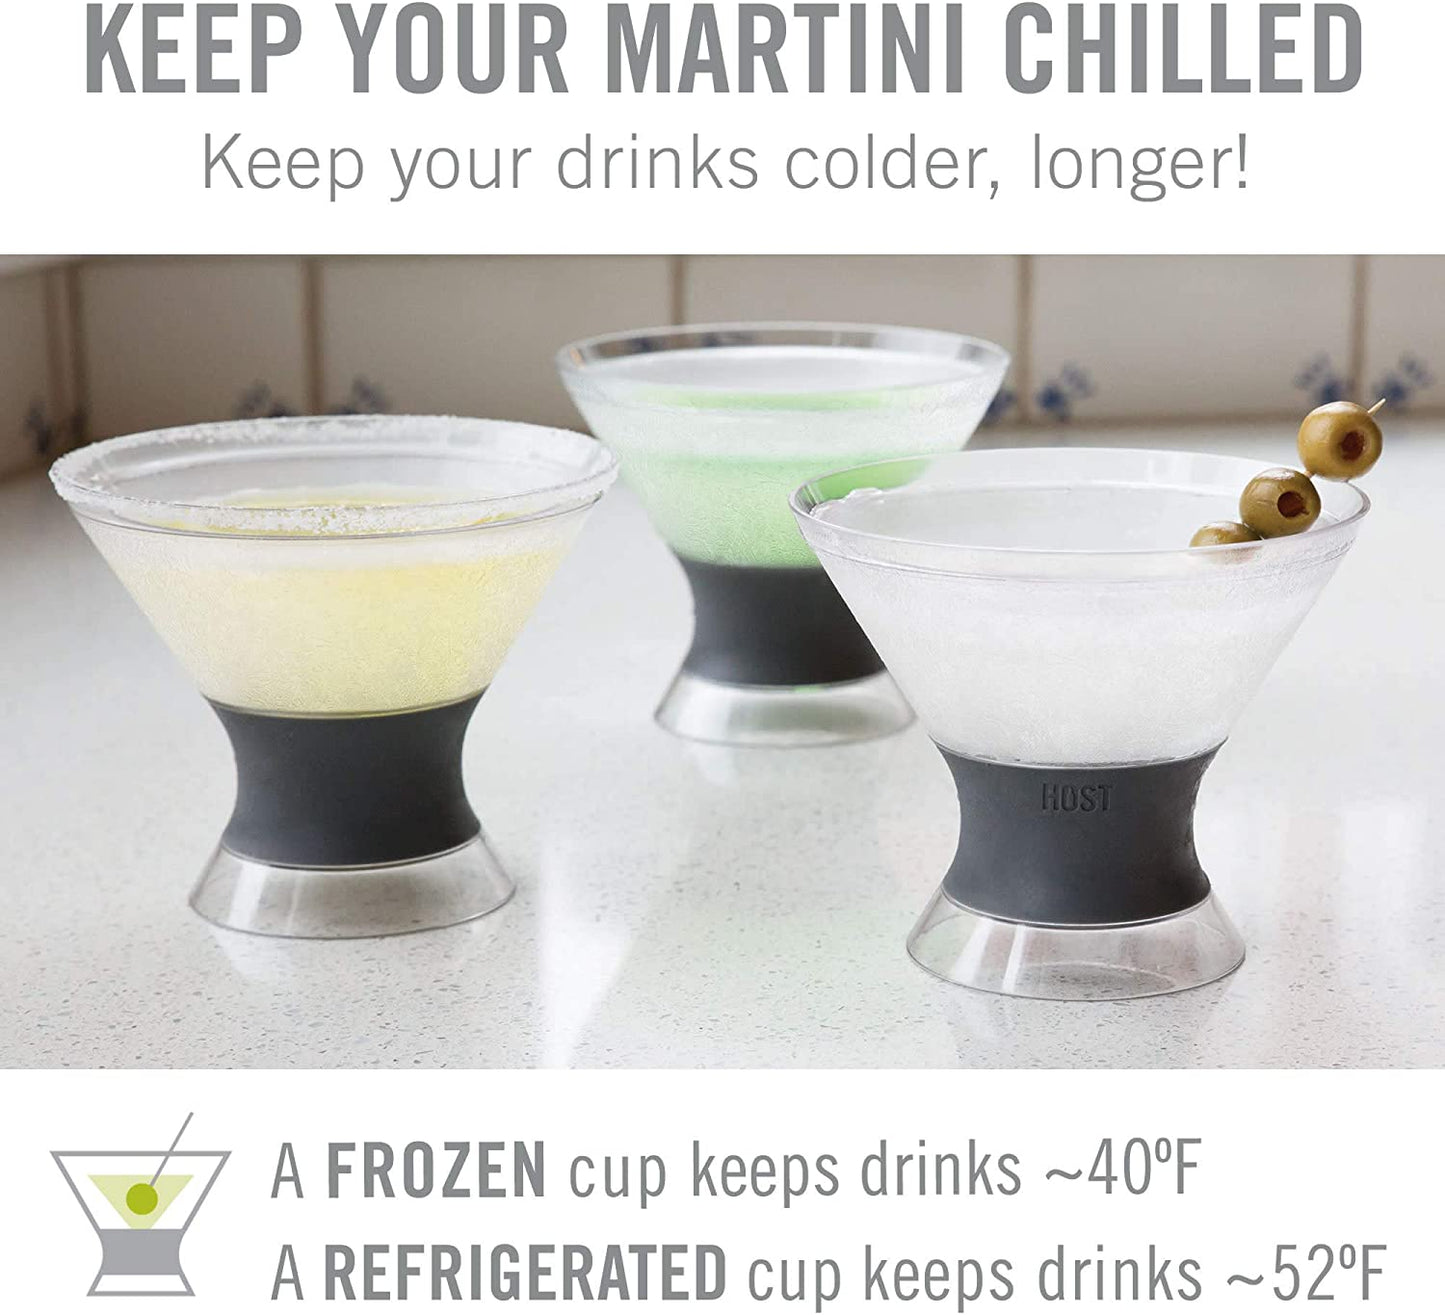 Freeze Insulated Martini Cooling Cups, Plastic Freezer Gel Chiller Double Wall Stemless Cocktail Glass Set of 2, 9 Oz, Grey